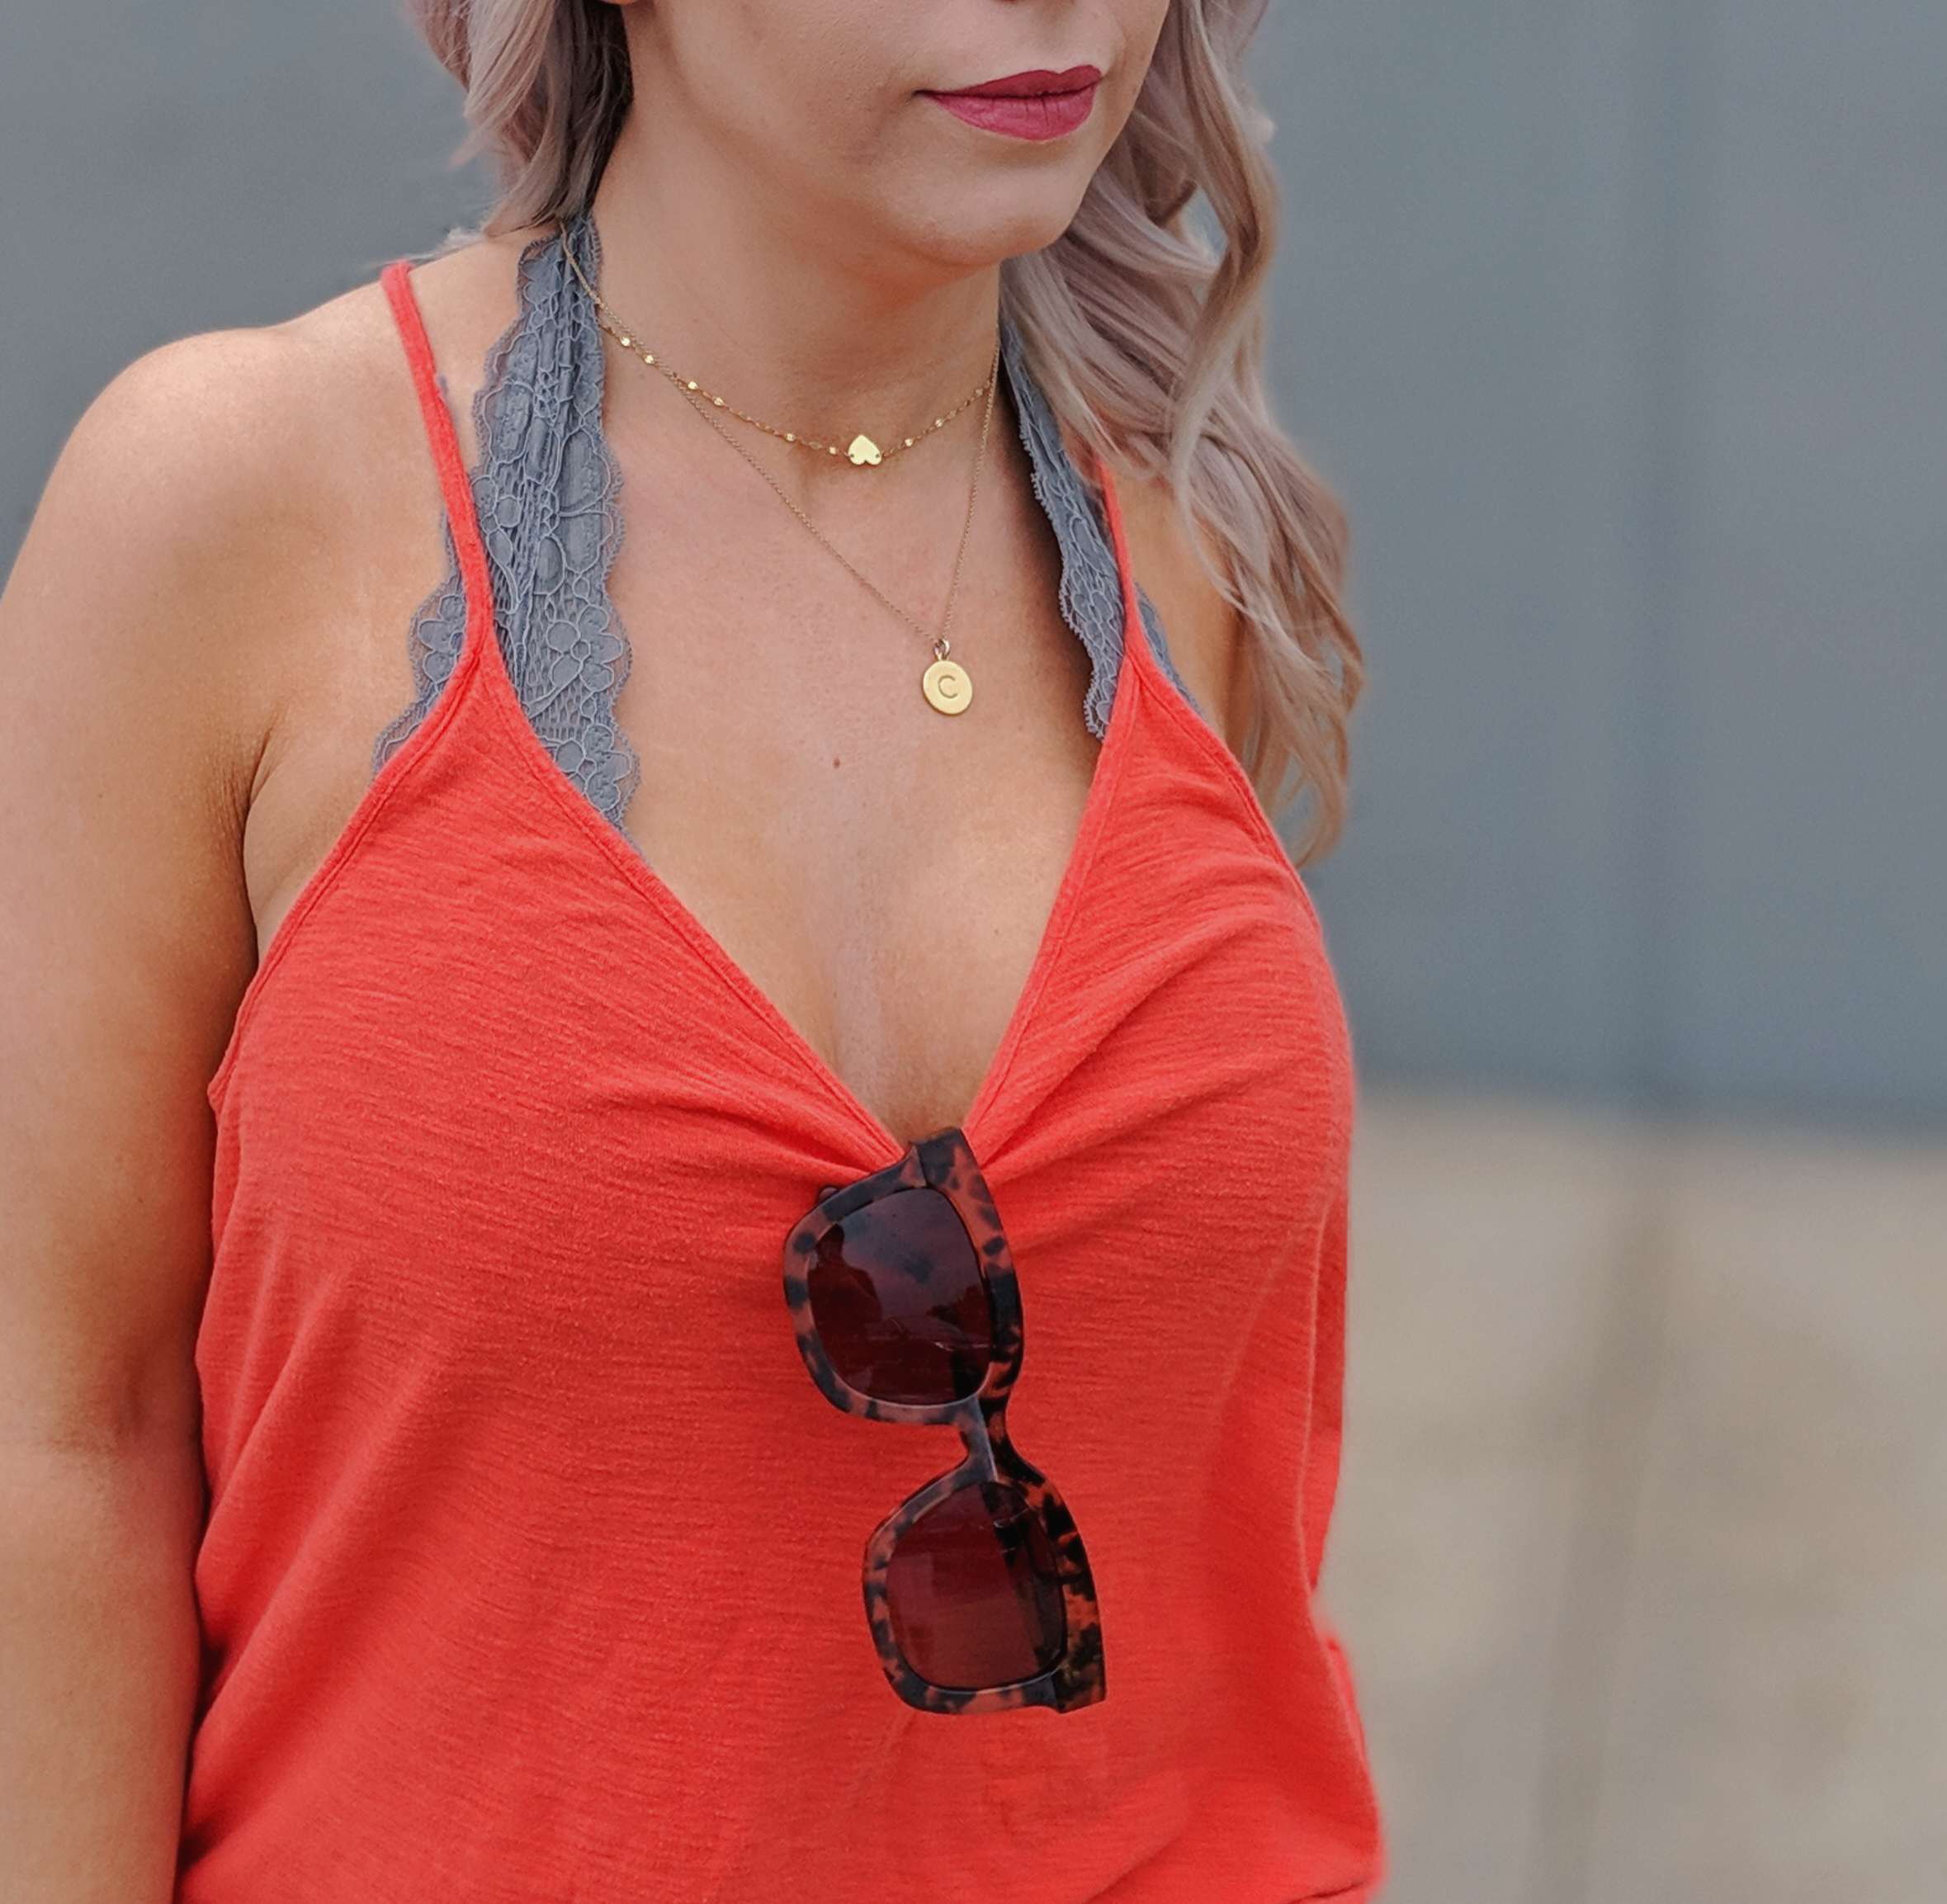 Halter Bralette Outfit Ideas: Halter bralette outfits perfect for all seasons! Fashion blogger Tricia Nibarger of COVET by tricia showcases halter bralette outfit ideas for spring, summer, fall, and winter. Cute halter bralette outfits, what to wear with a halter bralette. #liketkit #bralette #womensfashion 